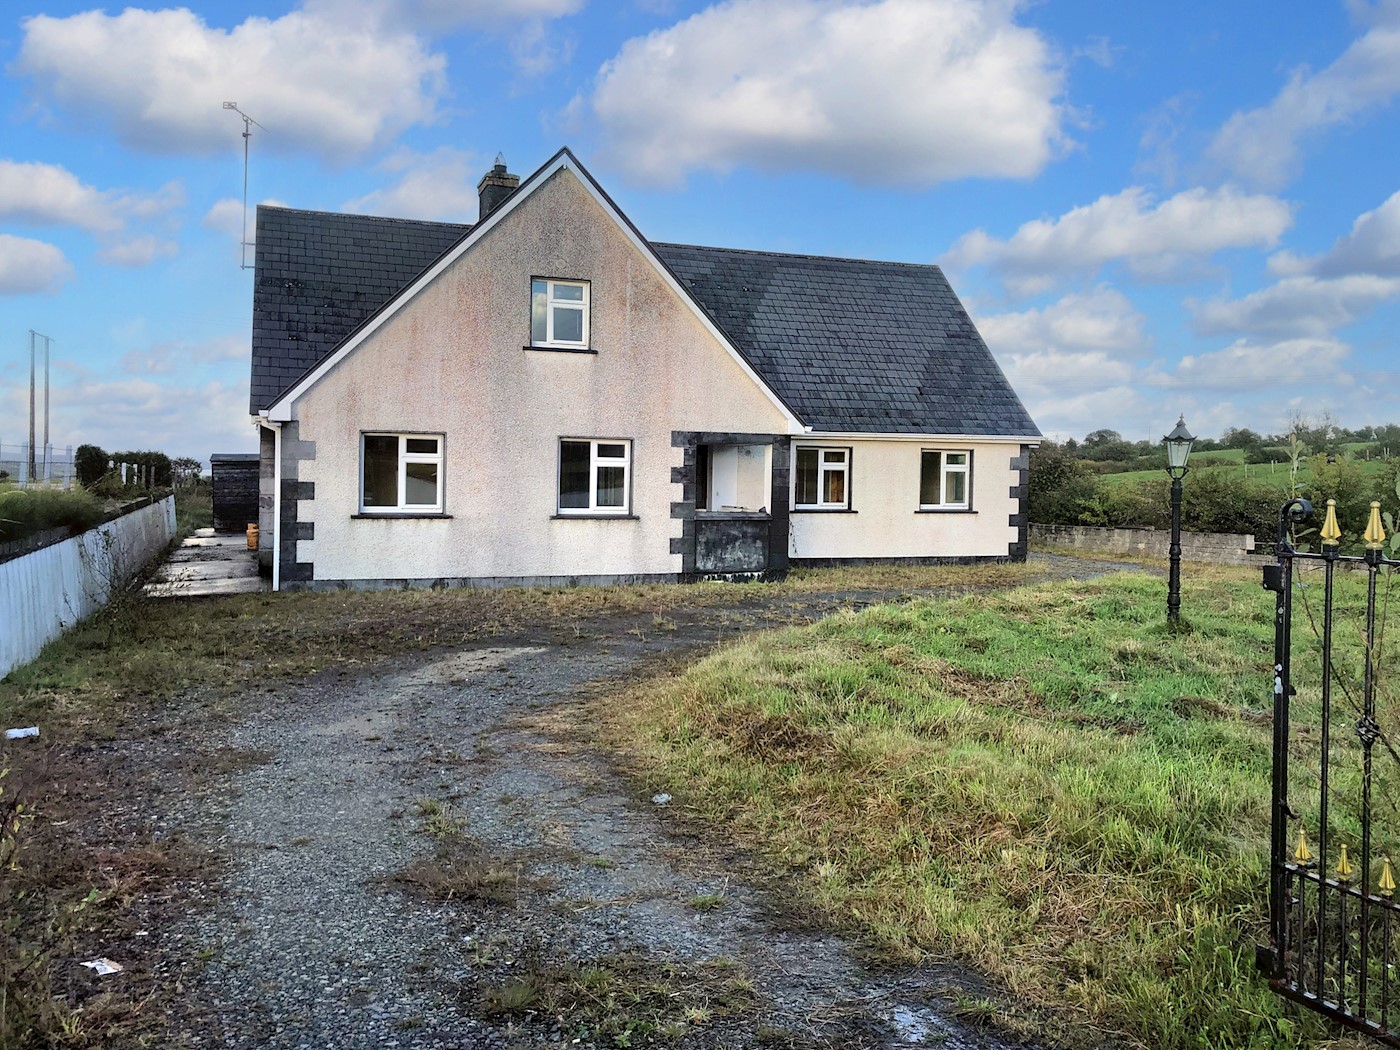 Correnagh, Letterkenny, Co. Donegal, F92KPW0 1/21